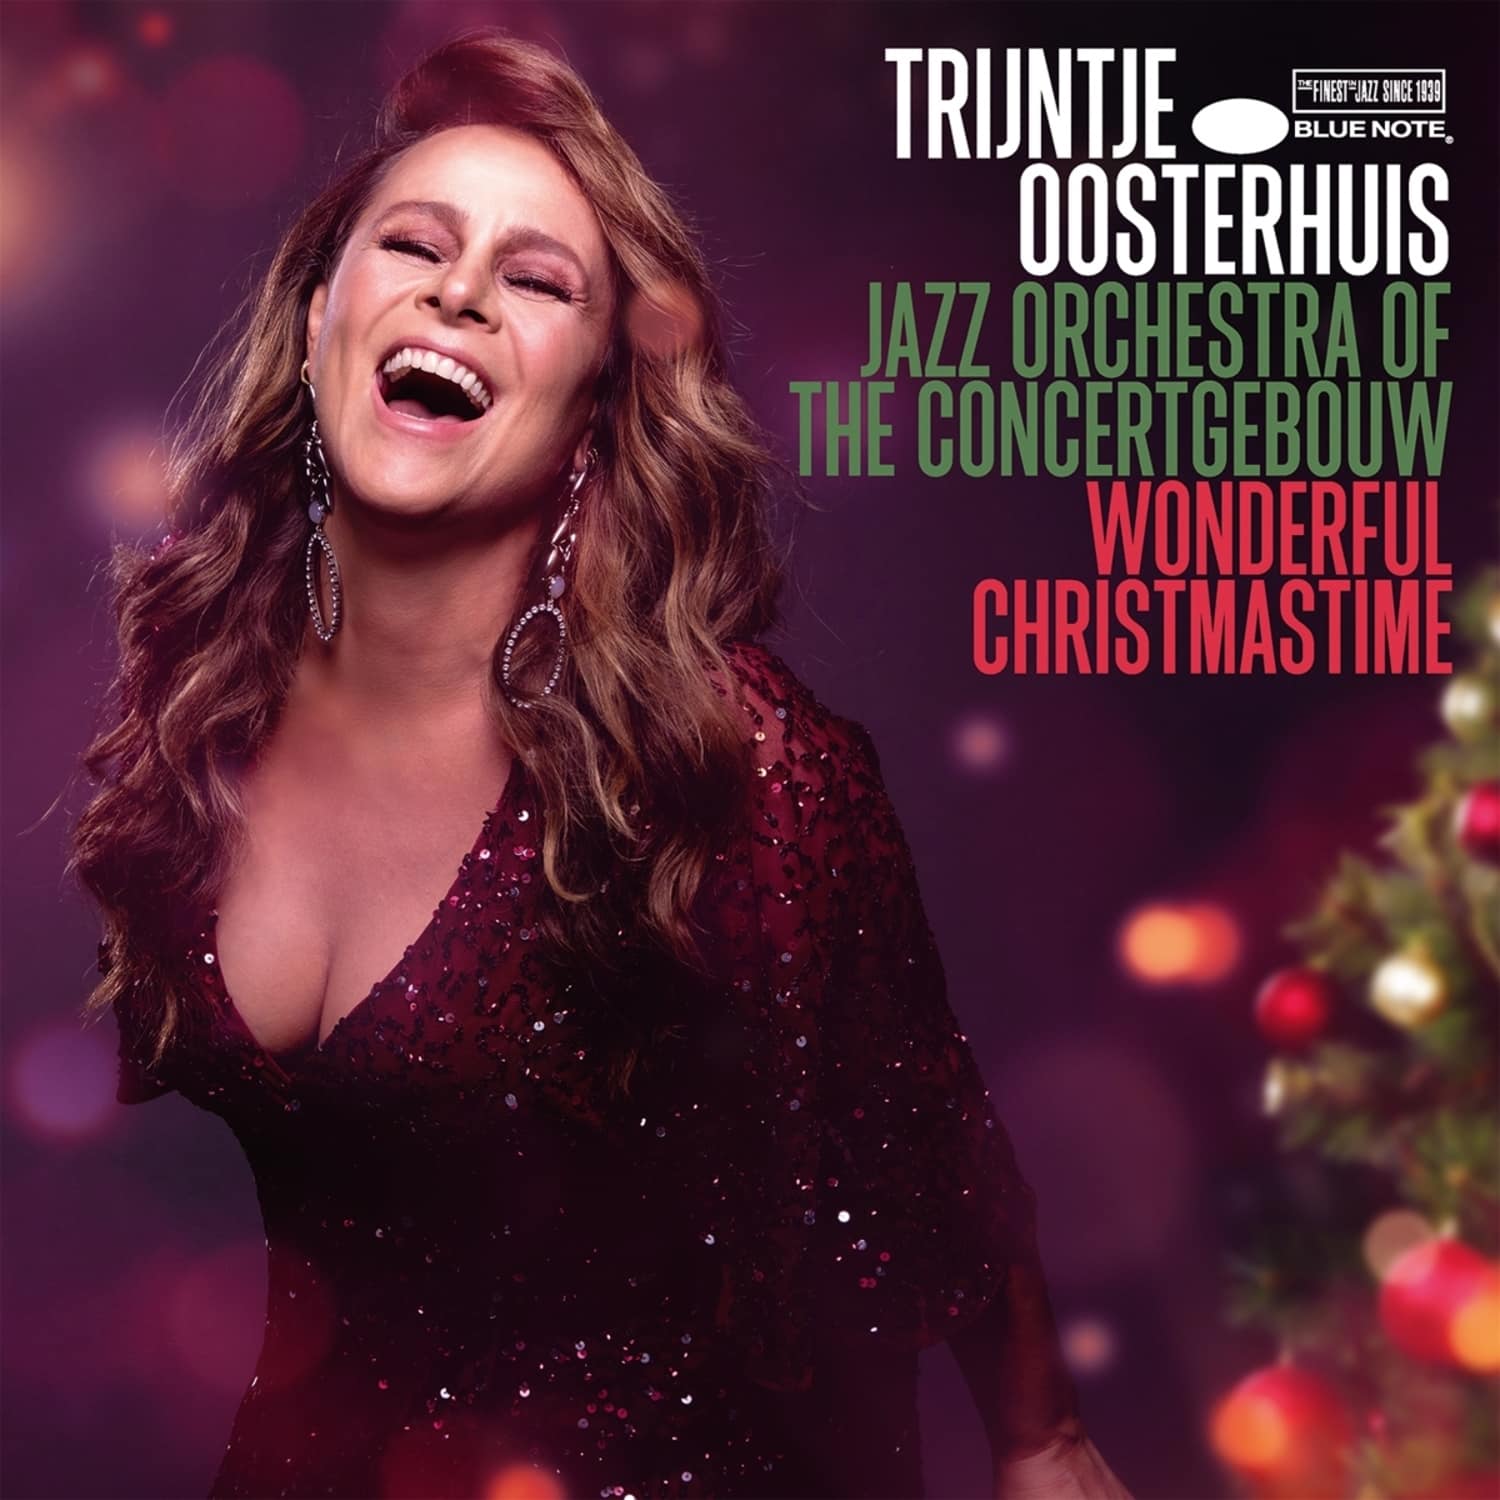  Trijntje Oosterhuis & Jazz Orchestra Of The Conce - WONDERFUL CHRISTMASTIME 